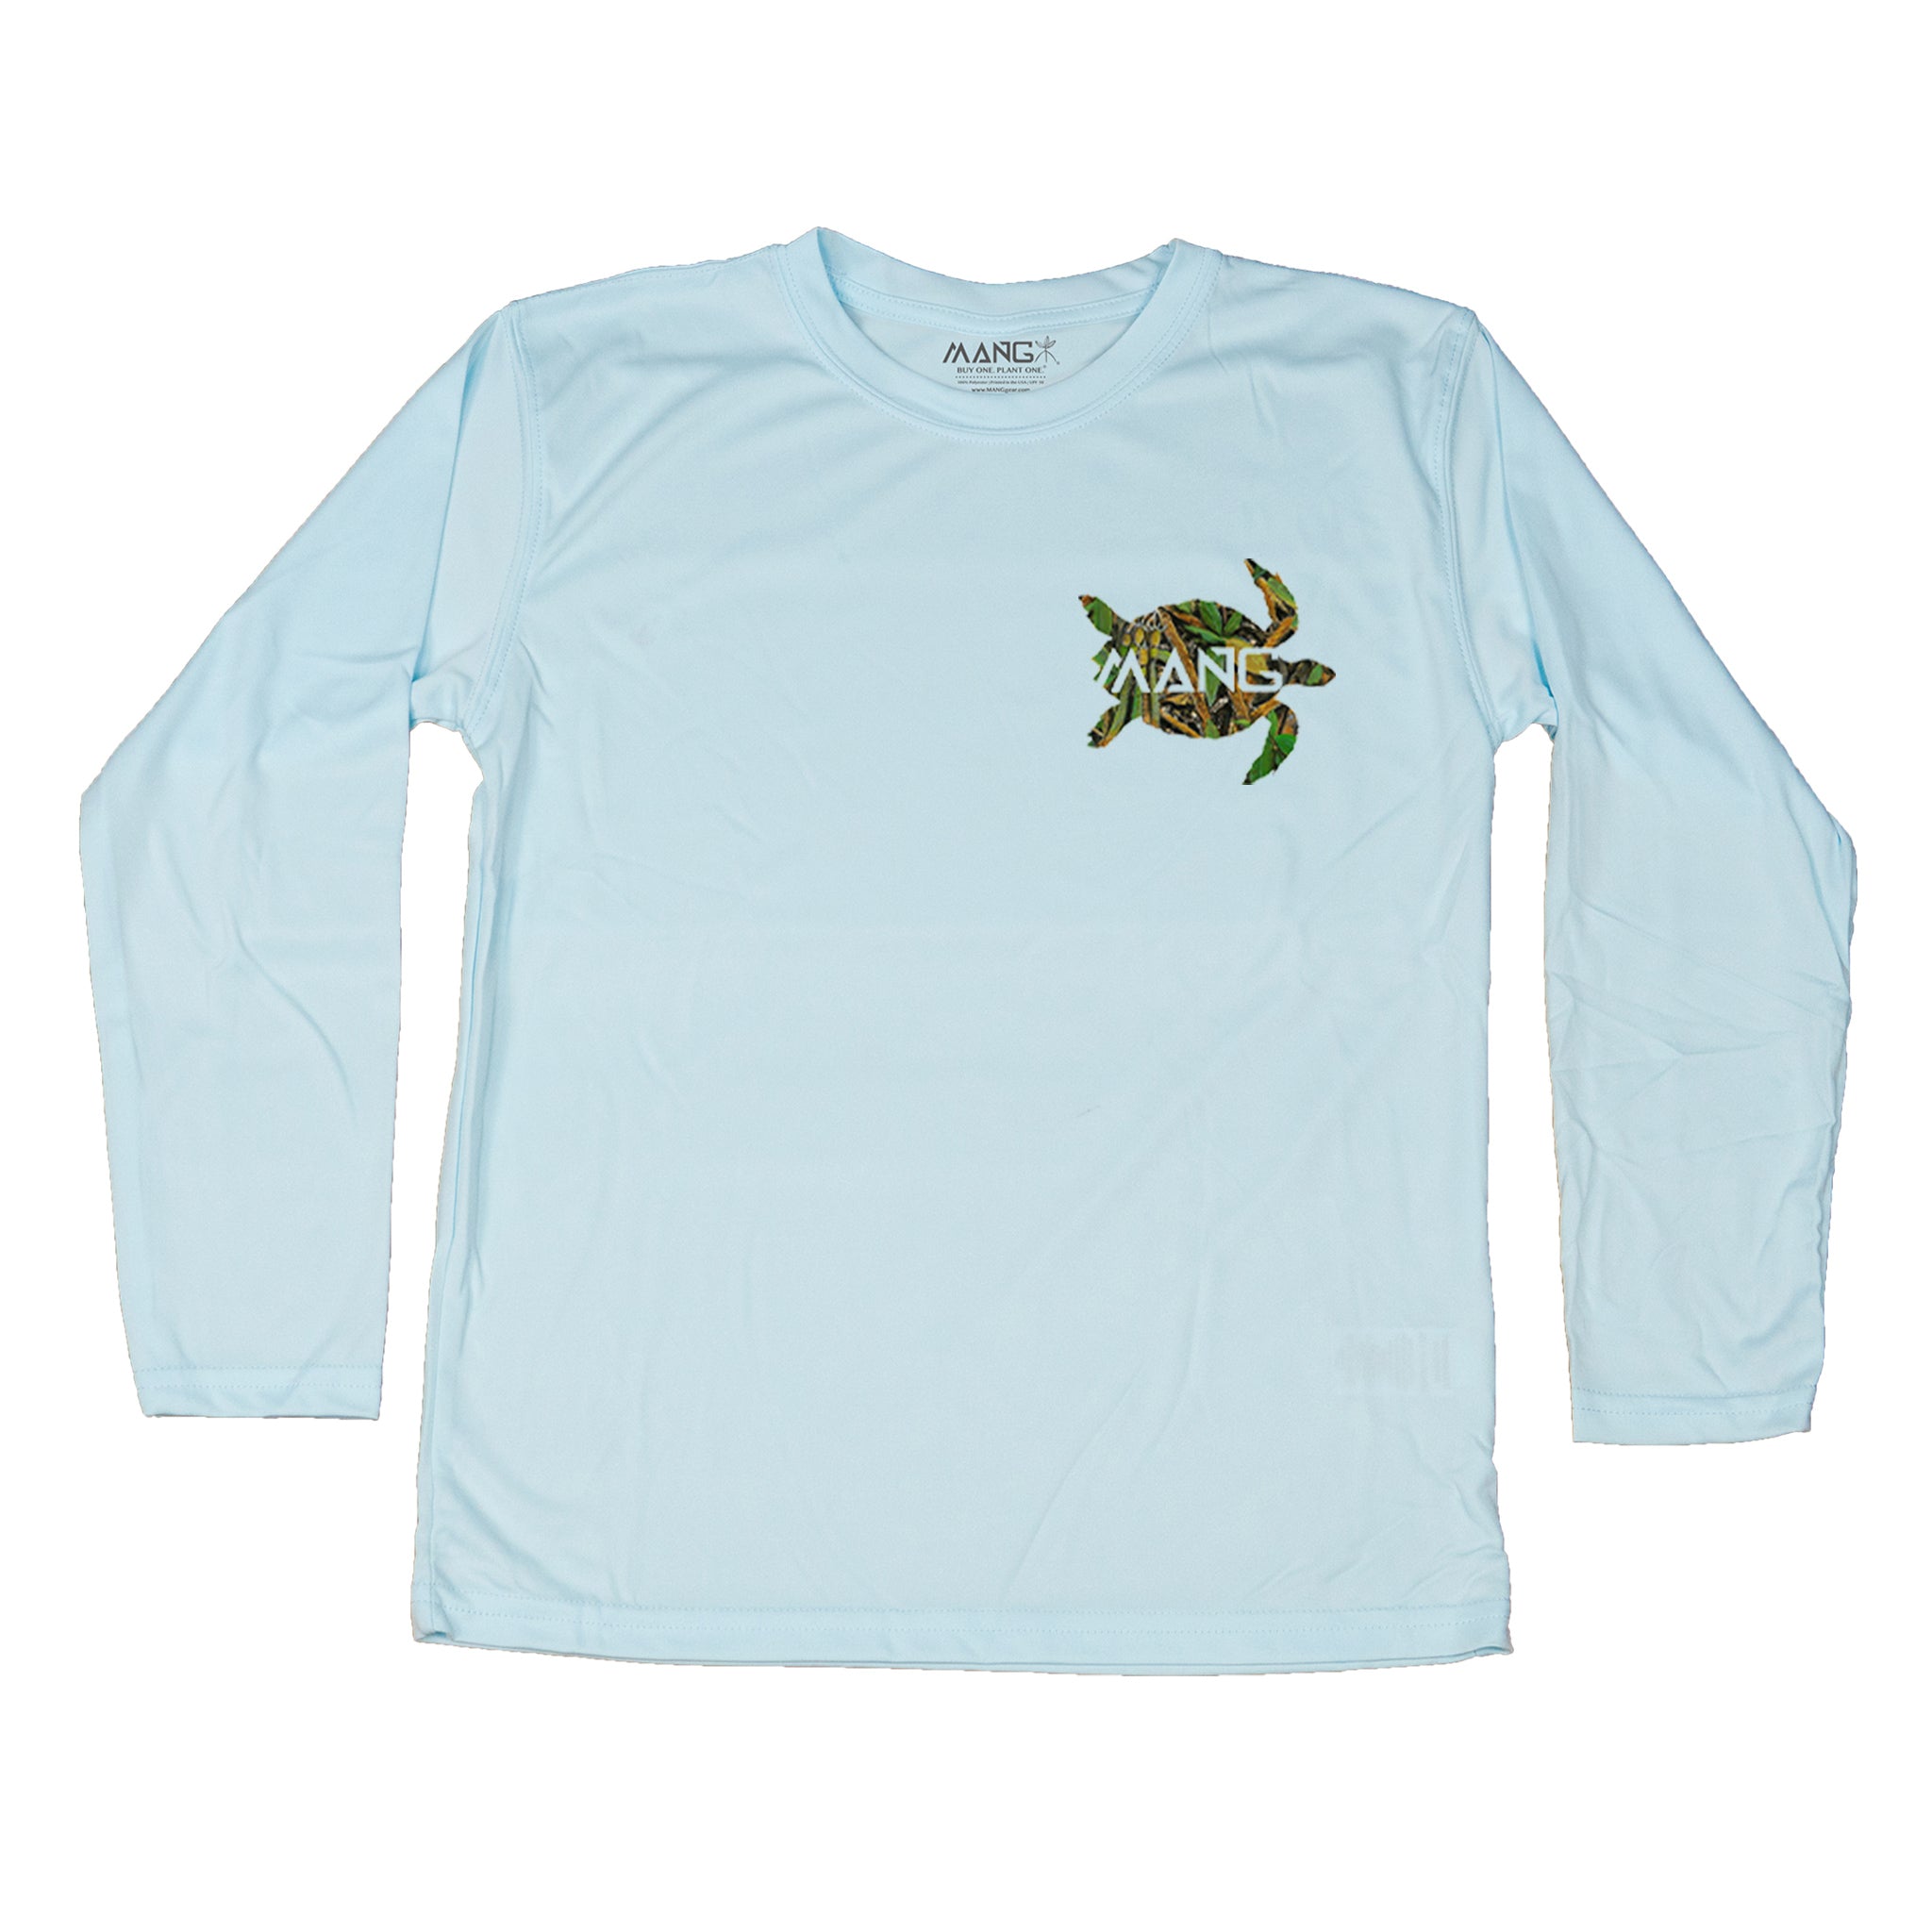 MANG Grassy Turtle - Youth - -